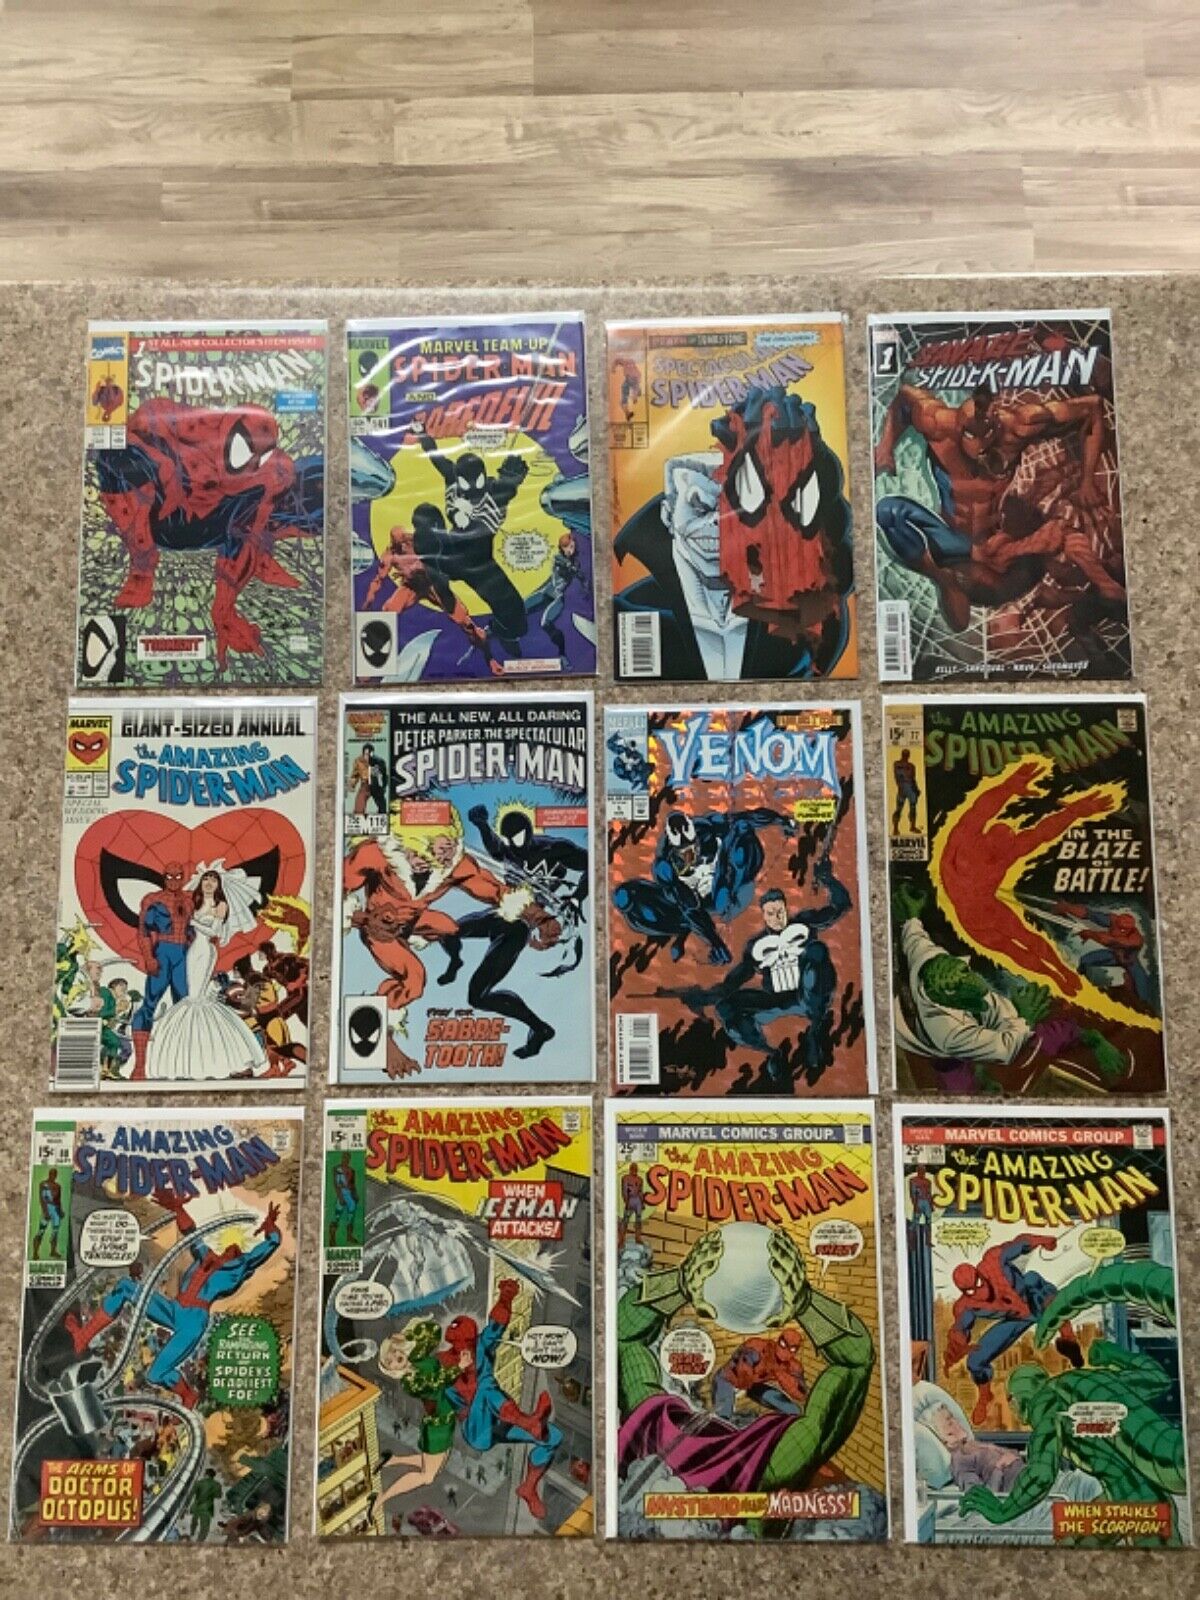 Huge Lot of Amazing Spider-Man Comics Very Good Condition